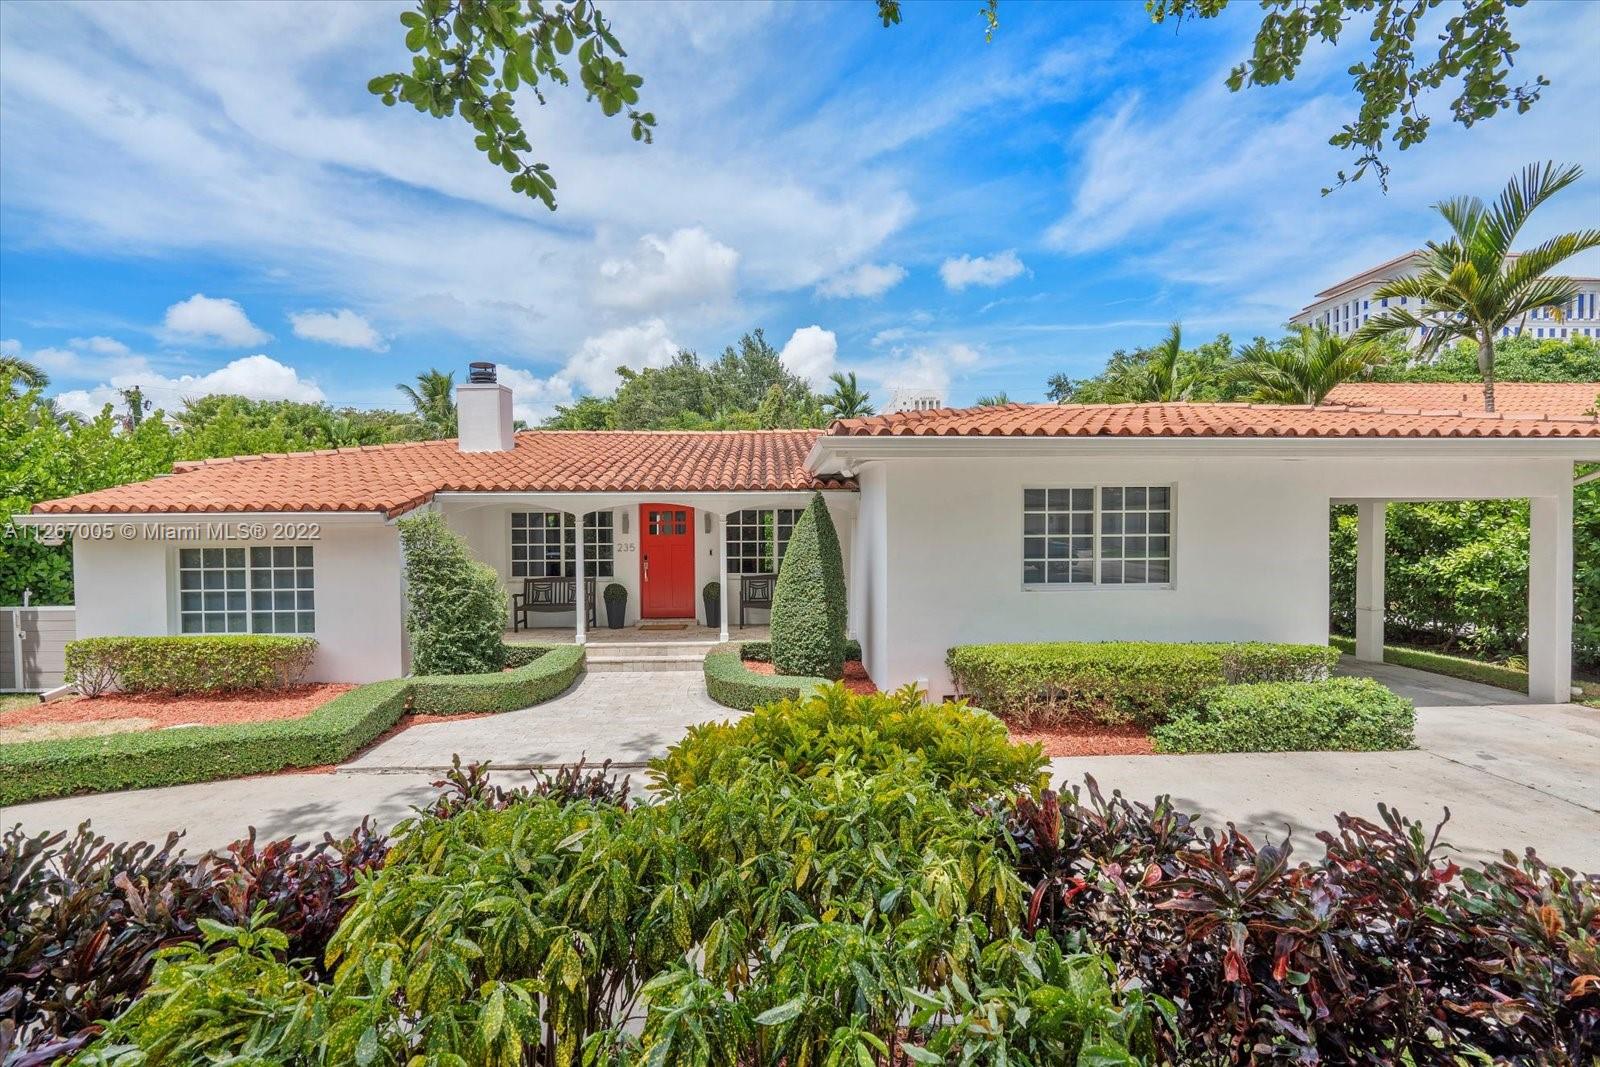 ELEGANT CORAL GABLES HOME FEATURING 4 BEDROOMS, 3 BATHS ALL BEAUTIFULLY RENOVATED WITH THE MOST WANTED UPGRADES, HIGH IMPACT WINDOWS, STATE OF THE ART POOL & PATIO OFFERING THE BEST AMENITIES FOR LAVISH ENTERTAINMENT. FORMAL LIVING ROOM AND DINING ROOM, MODERN KITCHEN OVERLOOKING FAMILY ROOM AND PATIO. PORCELAIN TILES THROUGHOUT, WELL APPOINTED MAIN SUITE WITH ADJACENT MAIN BATH OFFERING DOUBLE SINK VANITIES AND SHOWER. THREE SPACIOUS ADDITIONAL BEDROOMS.THE TREE BEST WISHES! LOCATION, COMFORT, CONVENIENCE ALL WITHIN WALKING DISTANCE TO FINE DINING, SHOPPING AND ENTERTAINMENT.